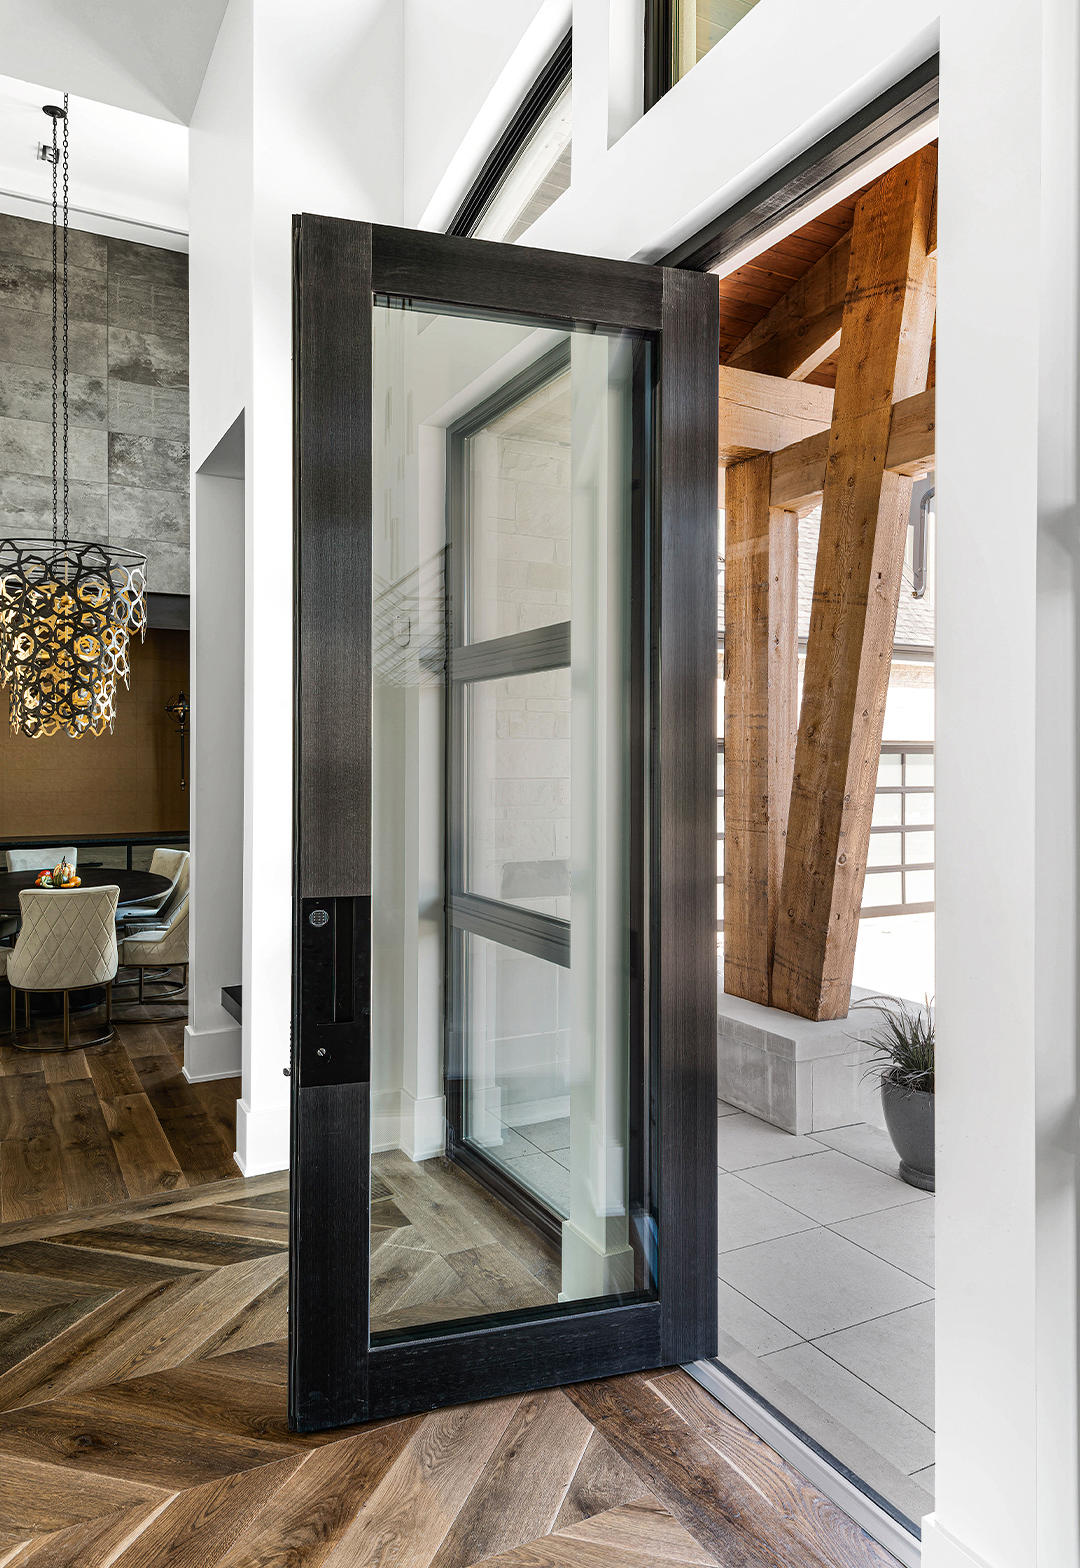 Nova | The pivoting safety door with glass elements that allows ...